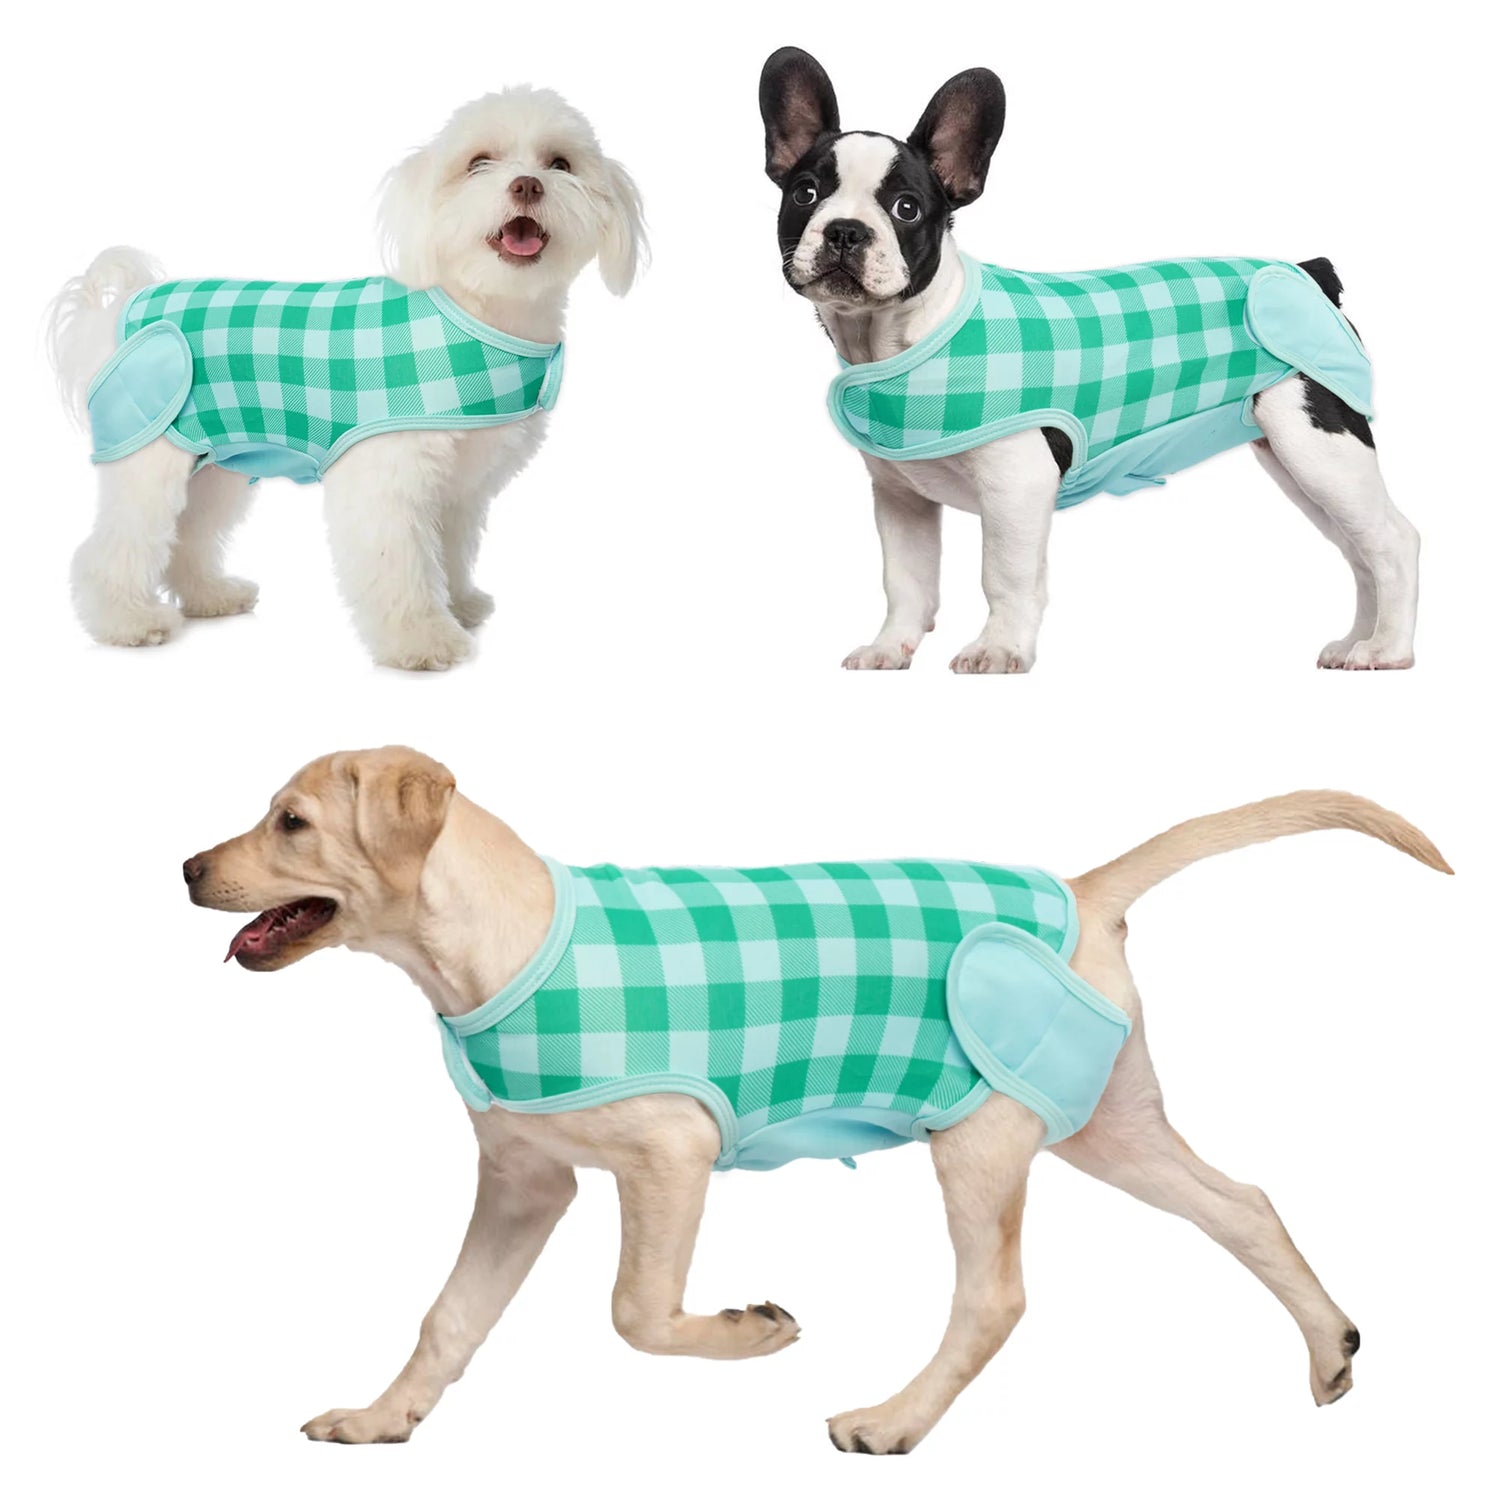 IDOMIK Dog Surgery Recovery Suit, Dog Onesie Recovery Suit after Surgery, Breathable Abdominal Wound Skin Diseases Protector, Cone Collar Alternative, Pet Dog Recovery Shirt